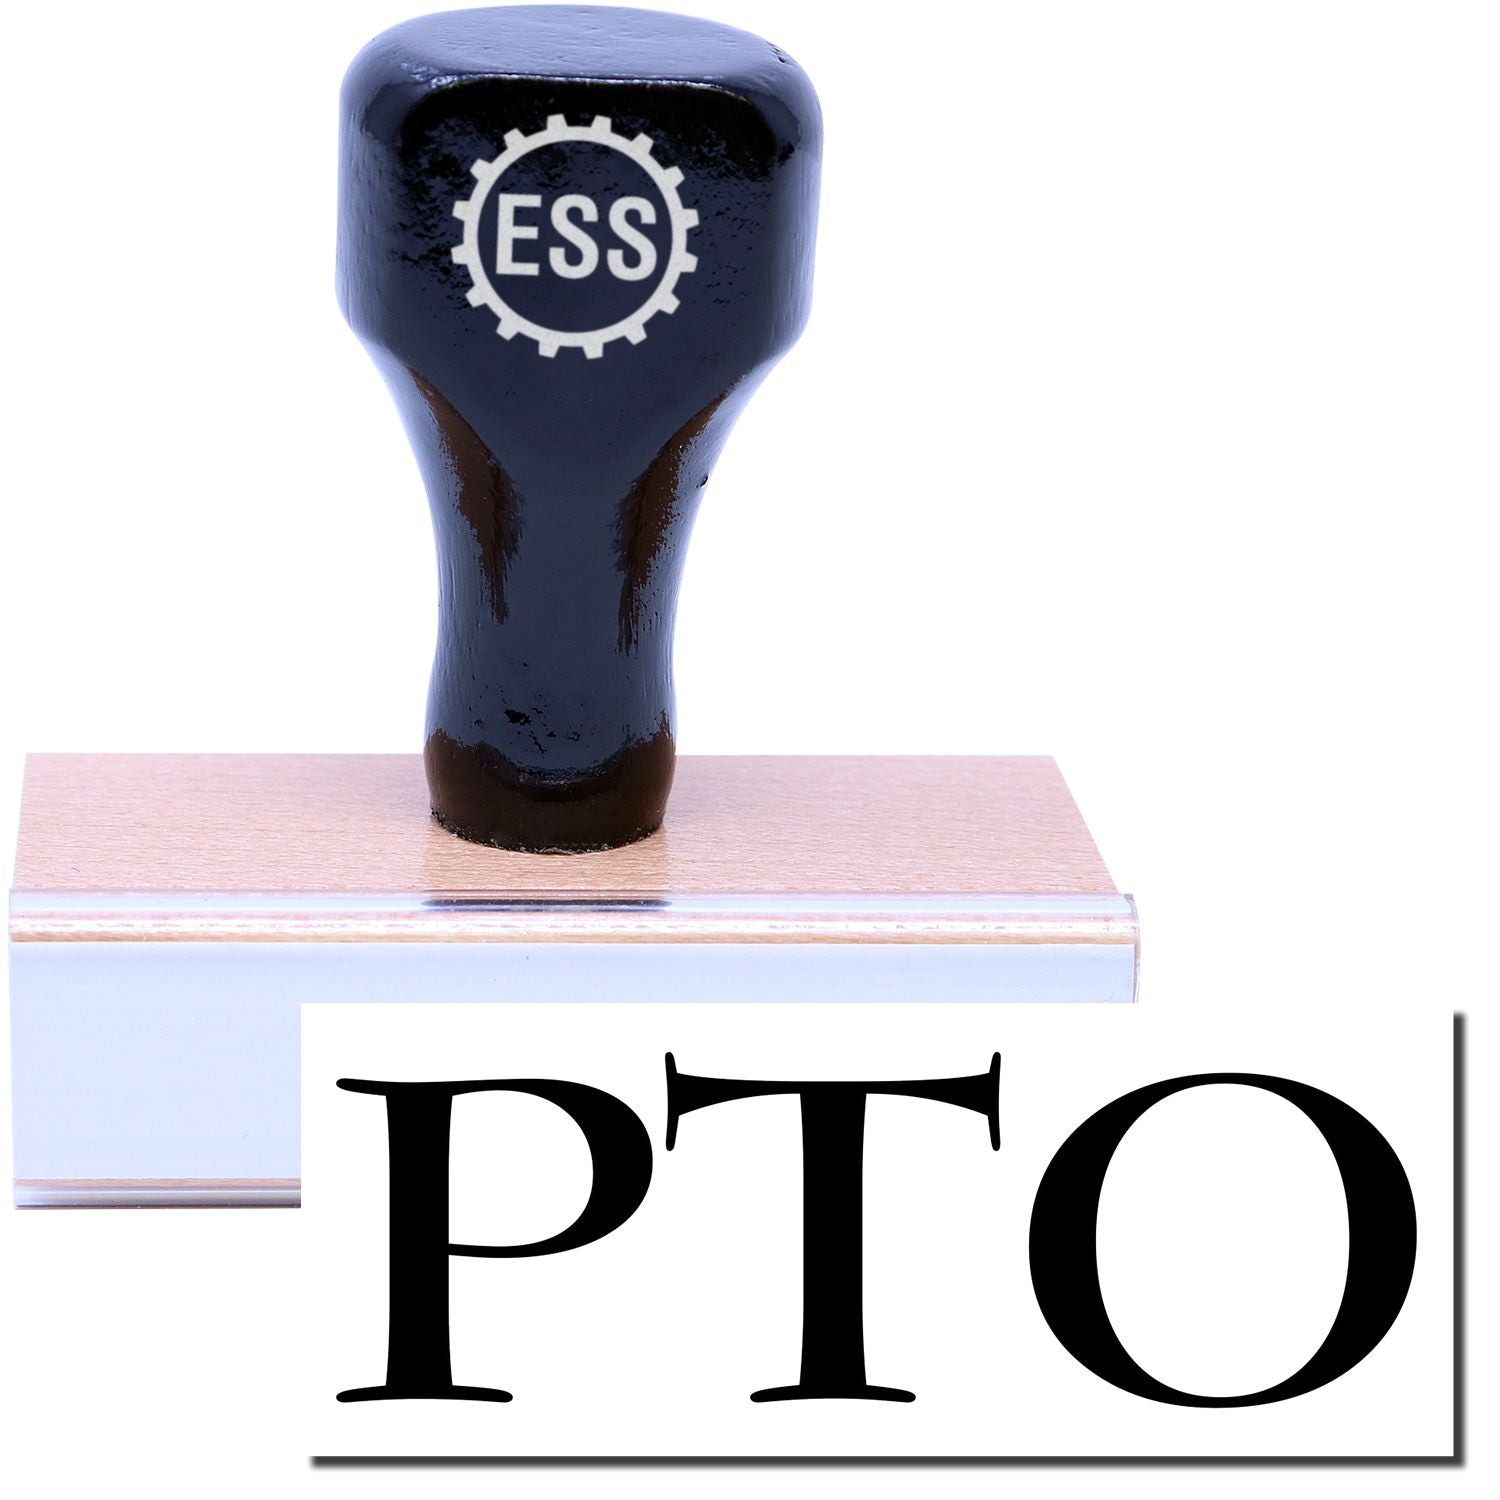 A stock office rubber stamp with a stamped image showing how the text "PTO" in a large font is displayed after stamping.